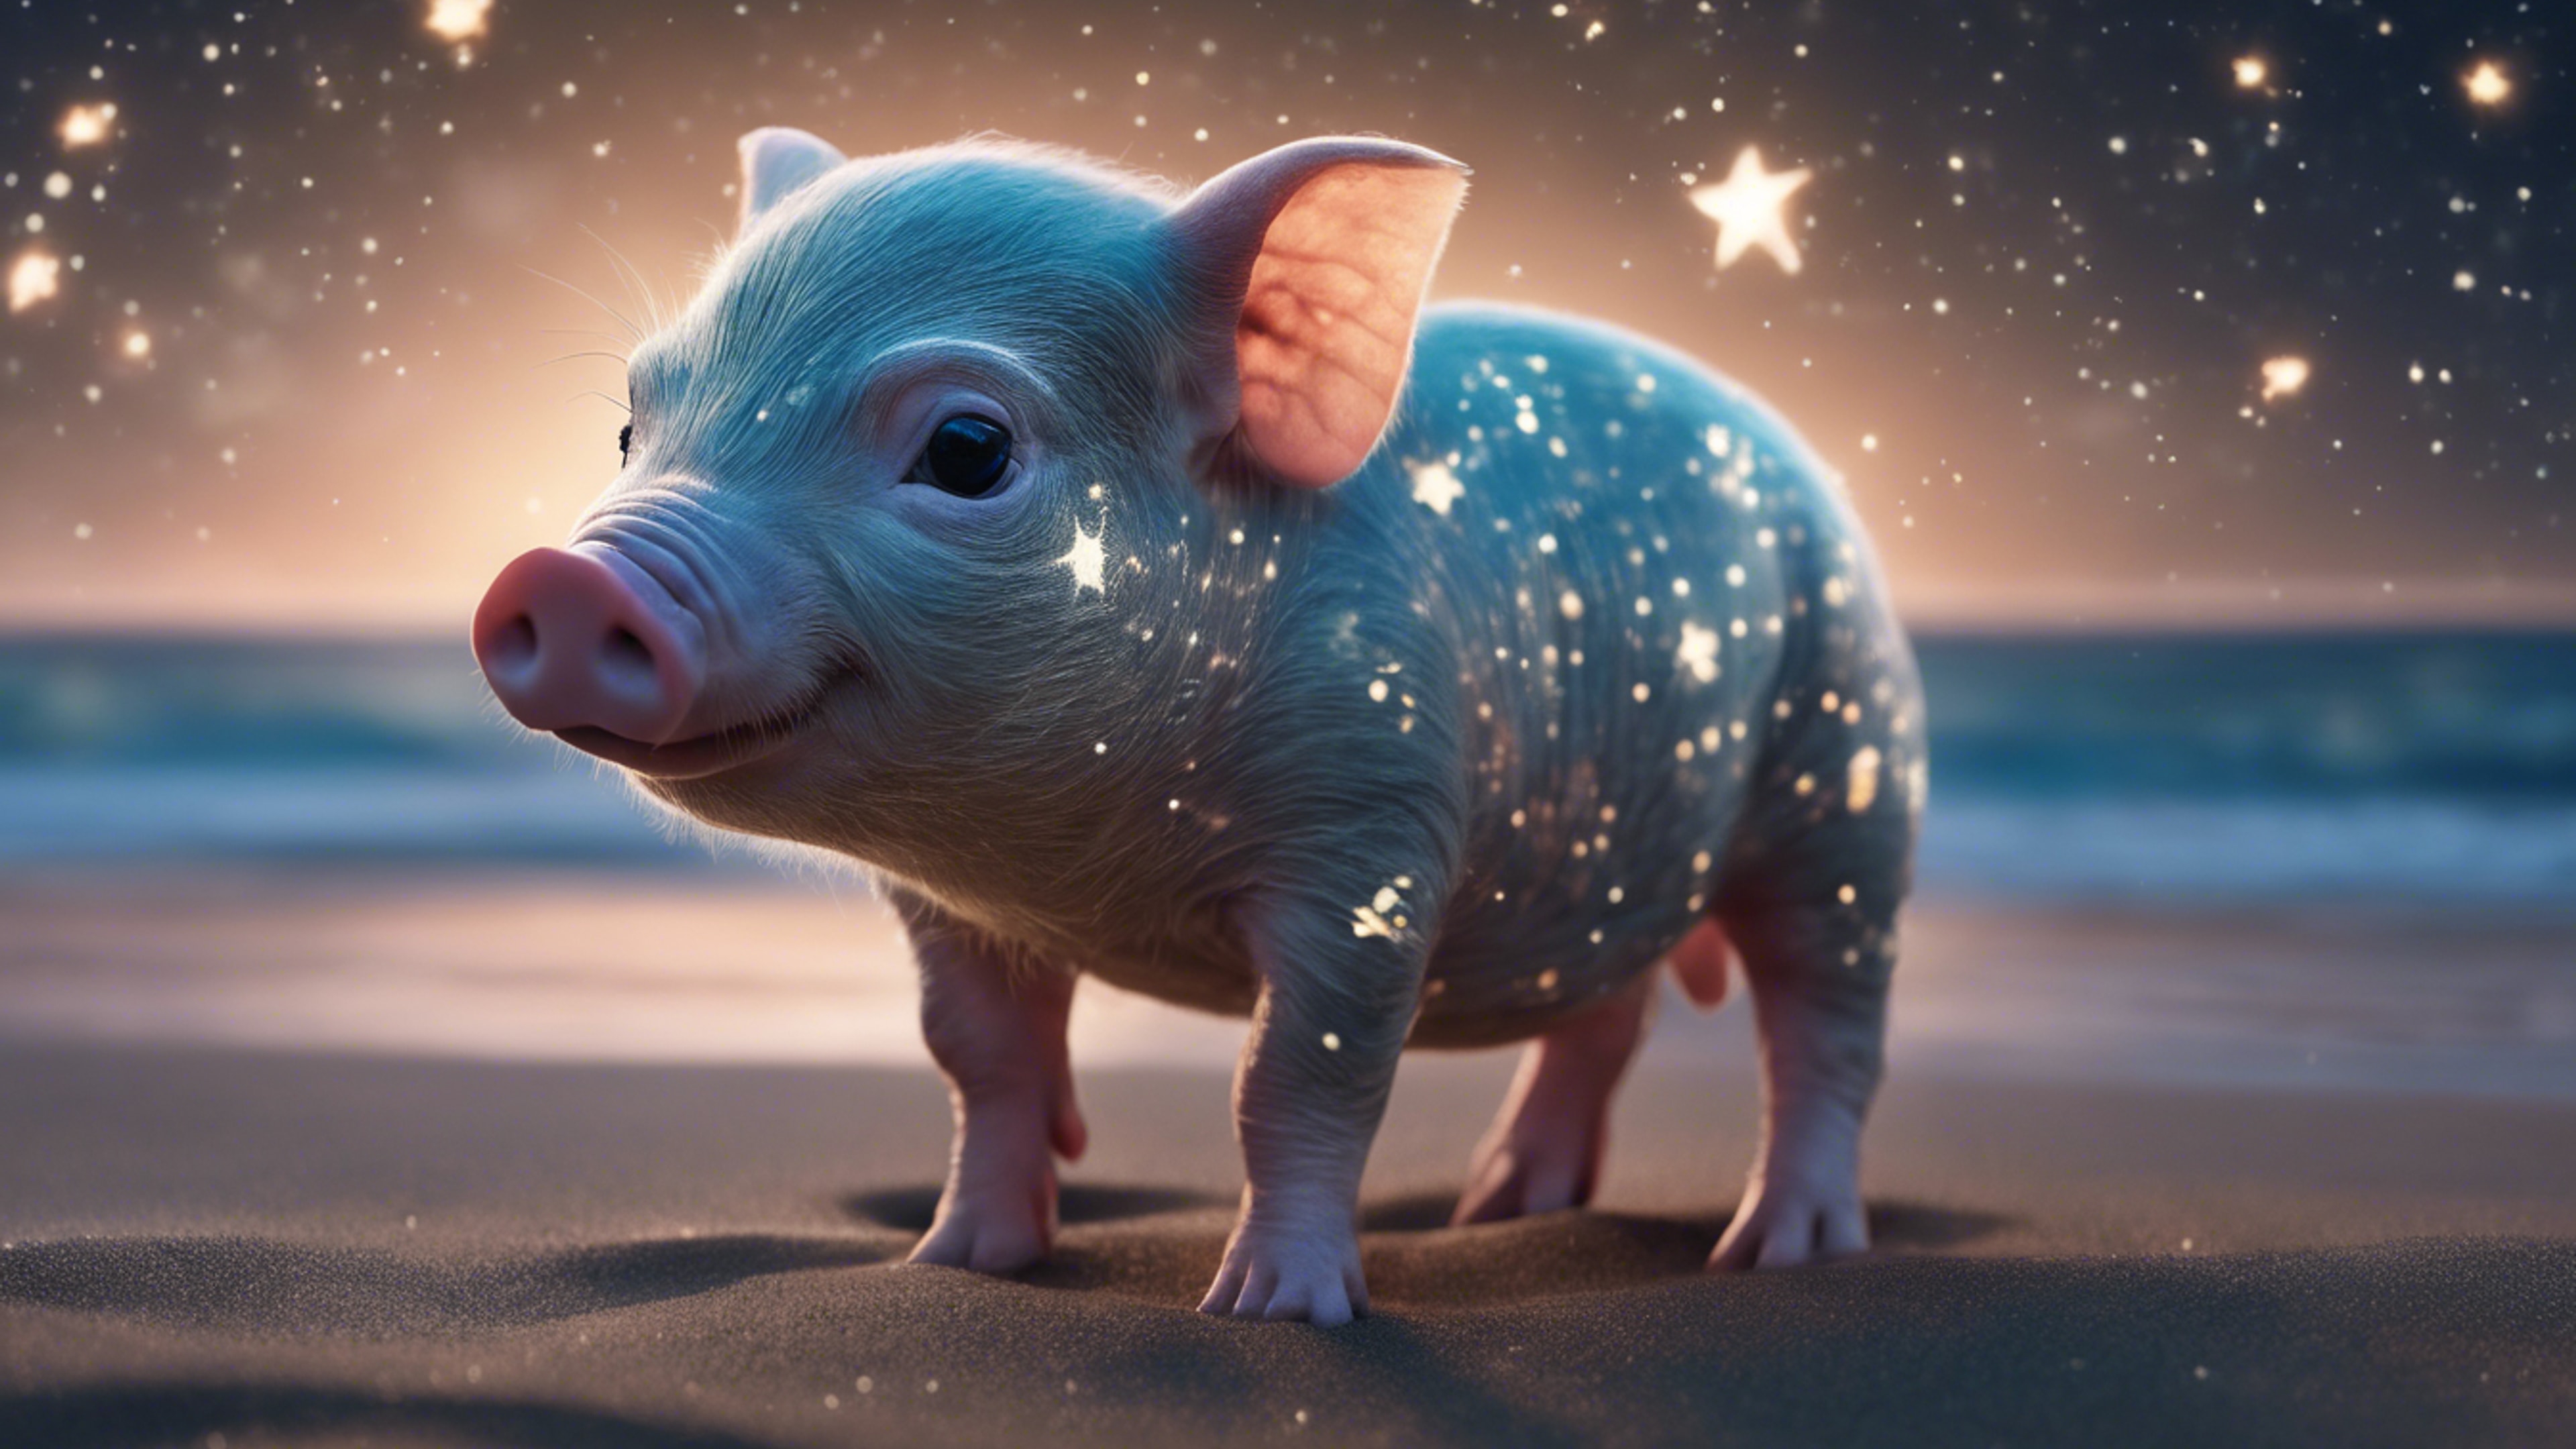 An unique digital rendering of a bioluminescent piglet on a calm beach under starry night sky. Tapeta[597018af159c4f7fa895]